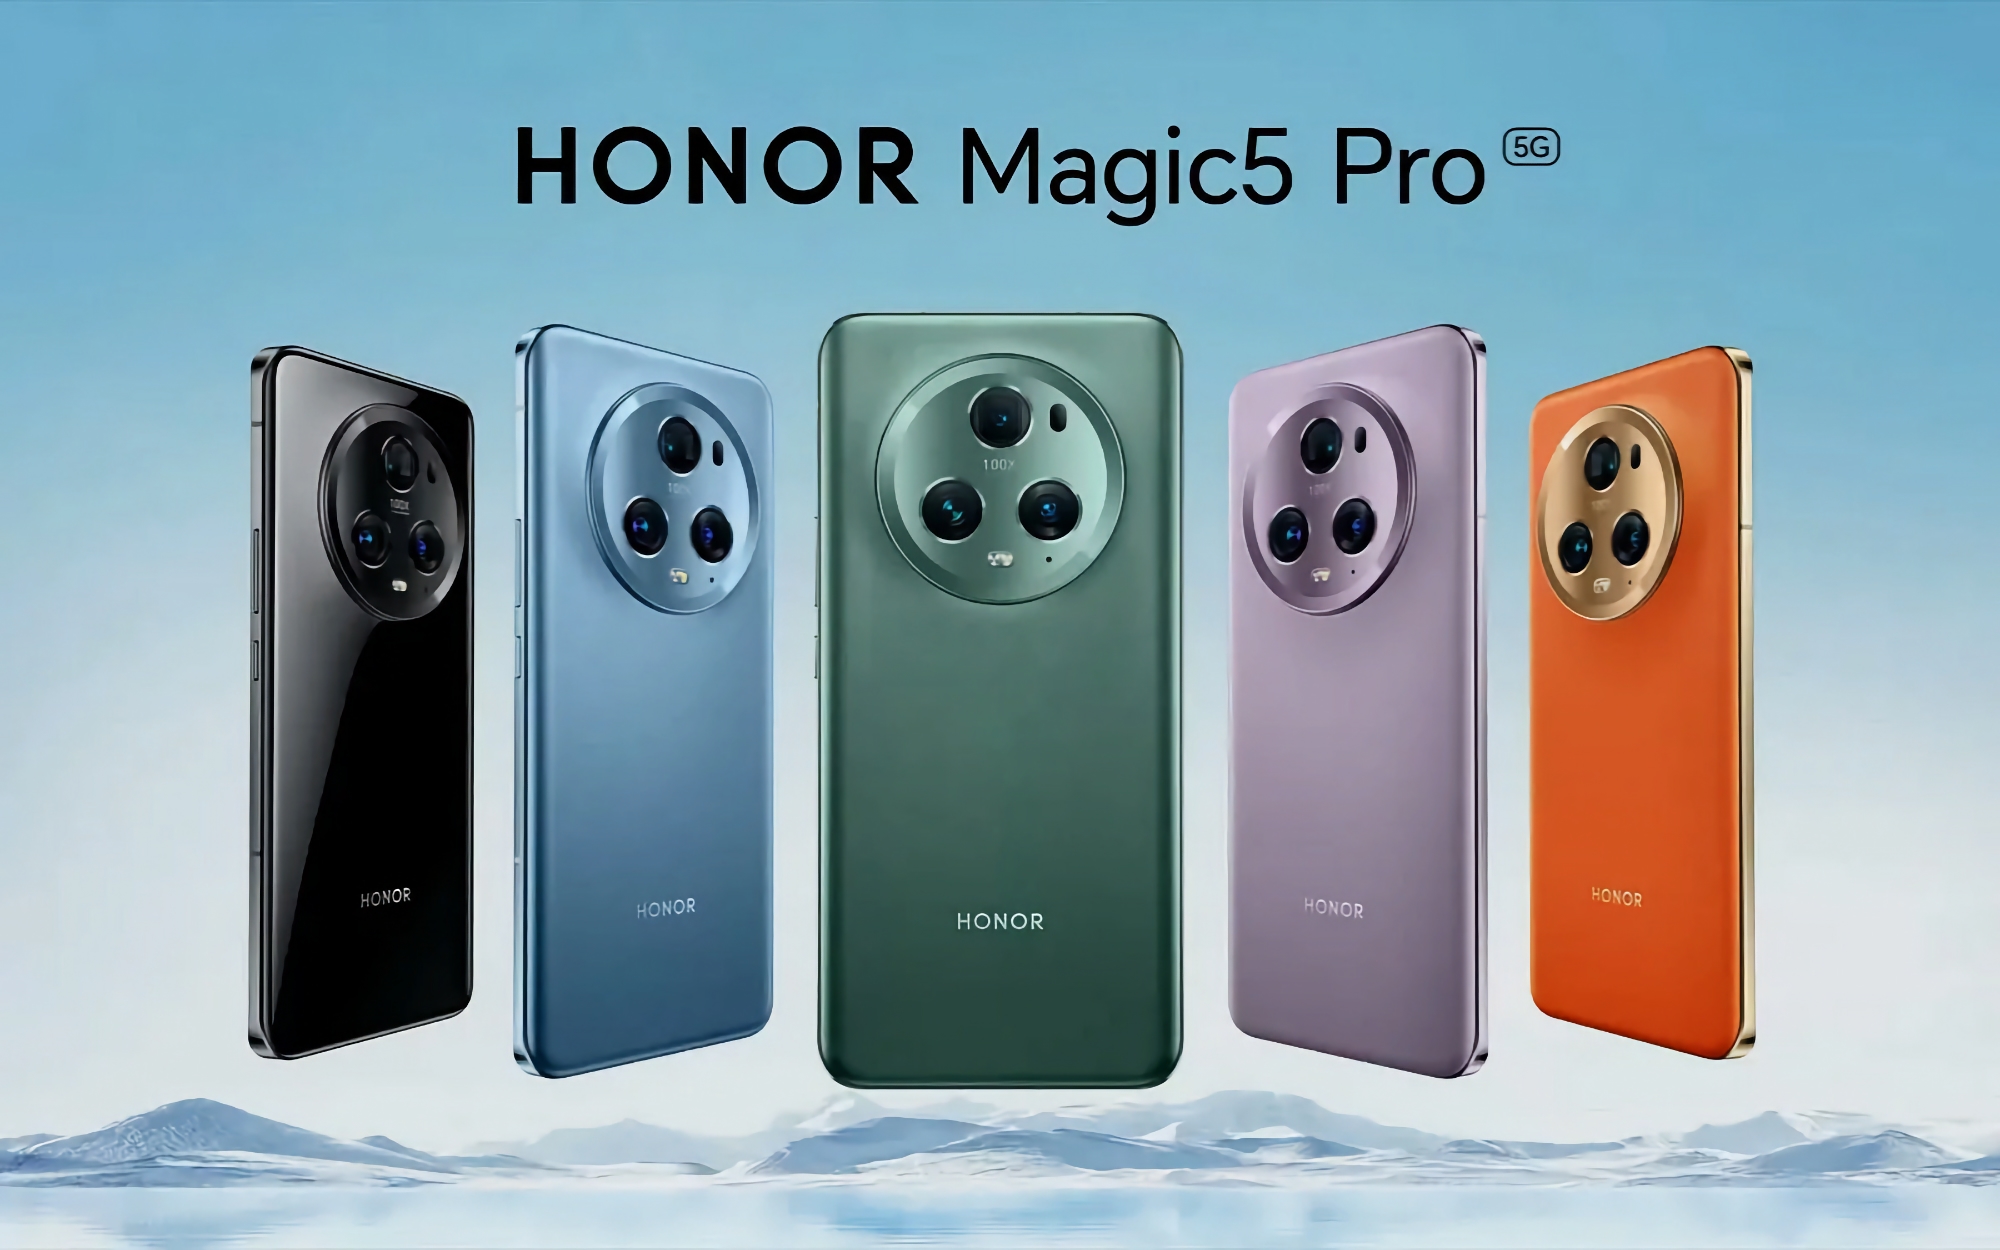 Honor Magic 5 Pro has received a major MagicOS update